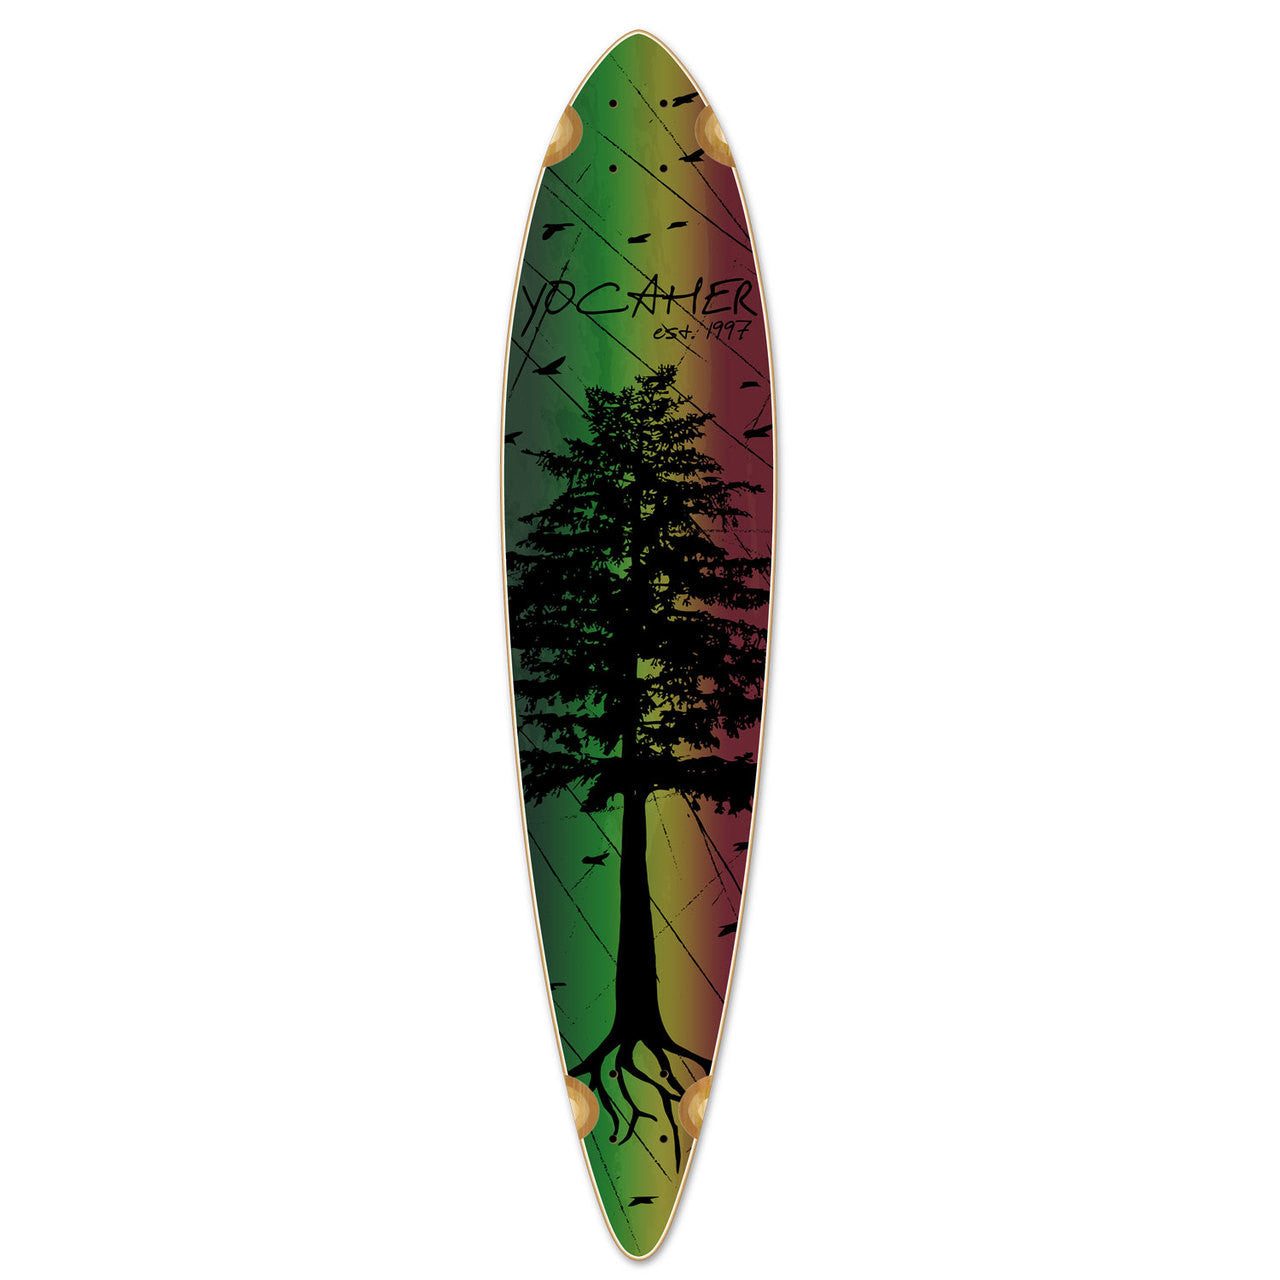 Yocaher Pintail Longboard Deck - In the Pines : Rasta